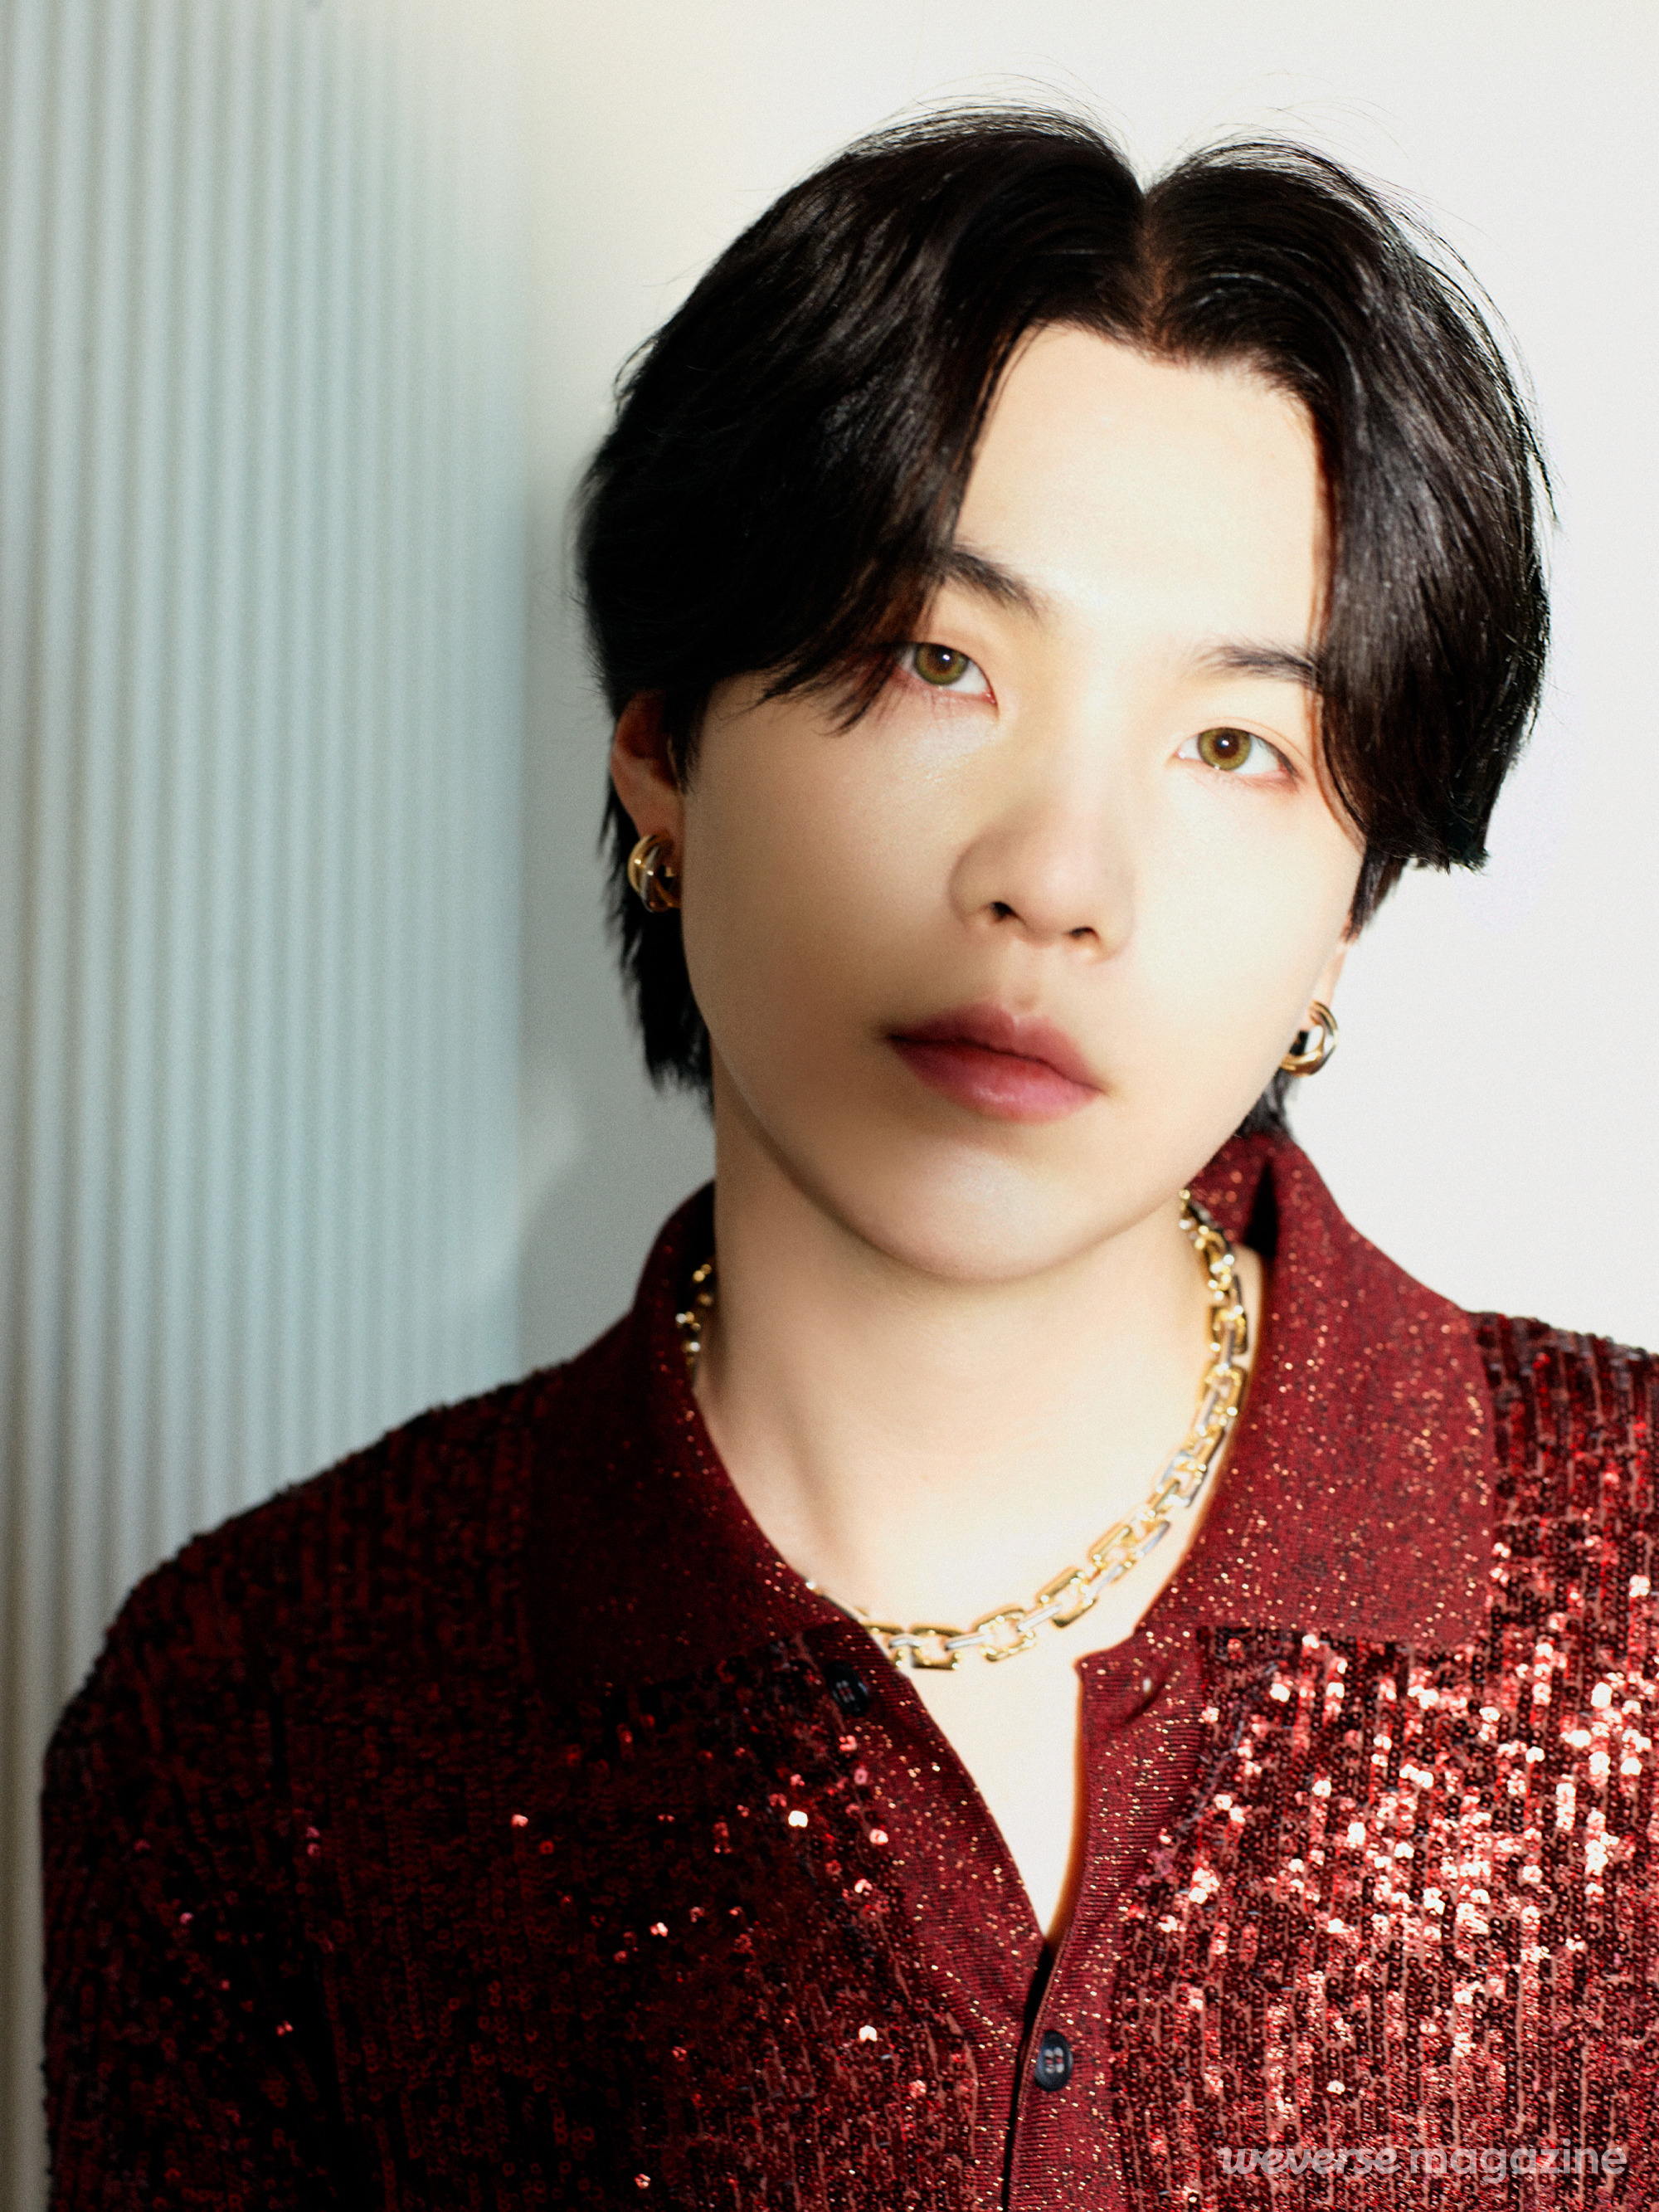 The most important thing is to be free: BTS' SUGA makes history as the  first male to grace the cover of Vogue Japan